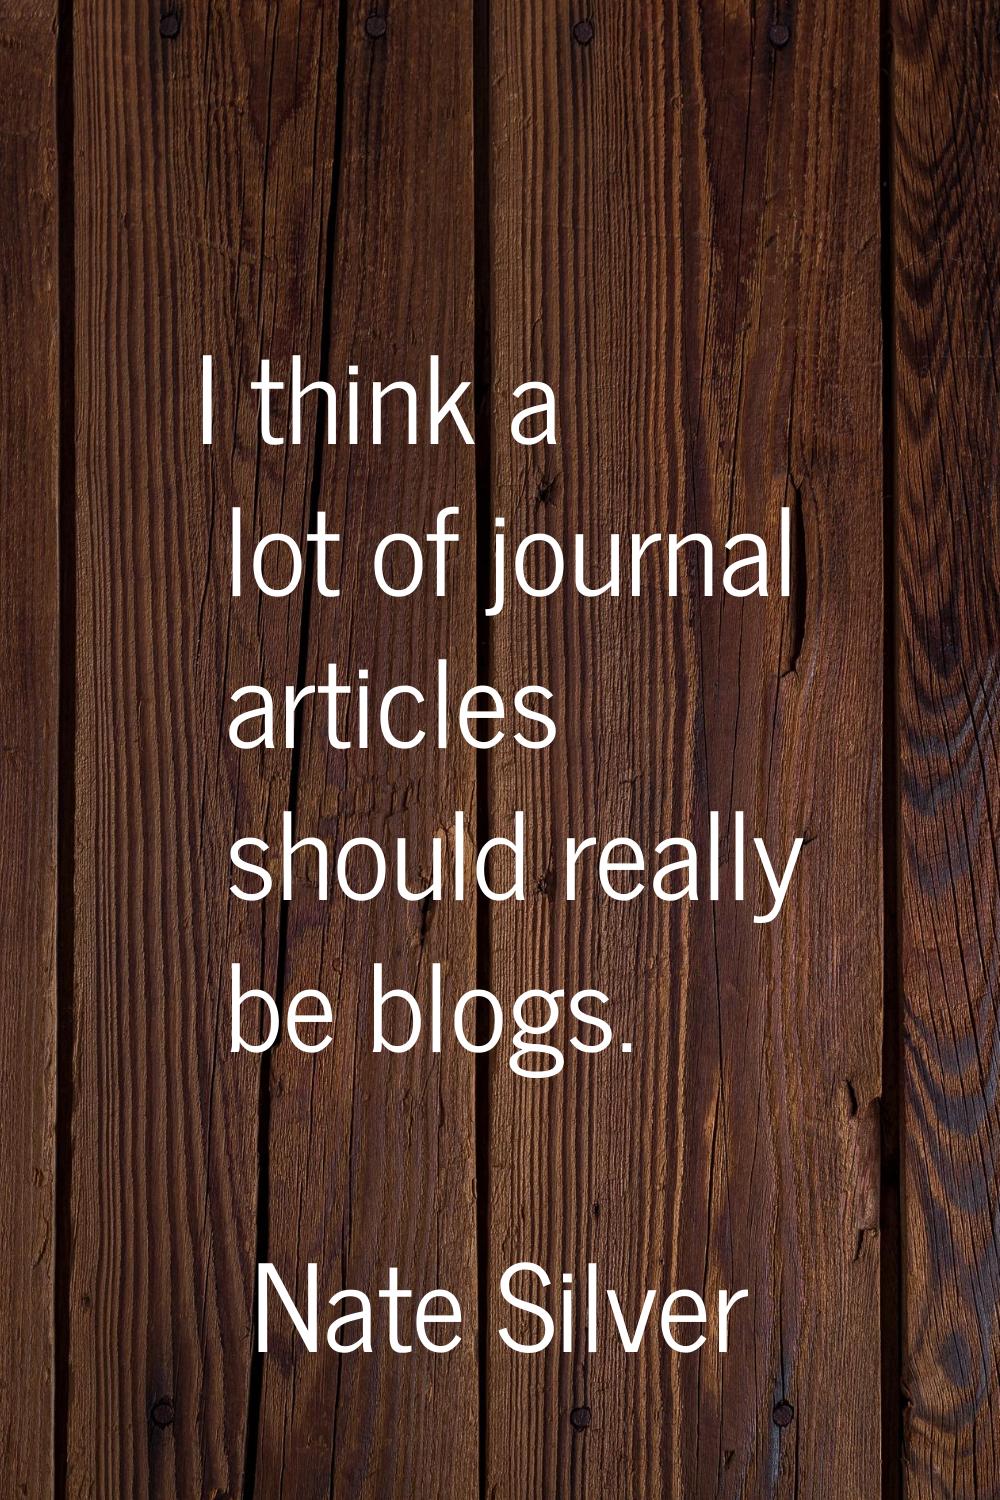 I think a lot of journal articles should really be blogs.